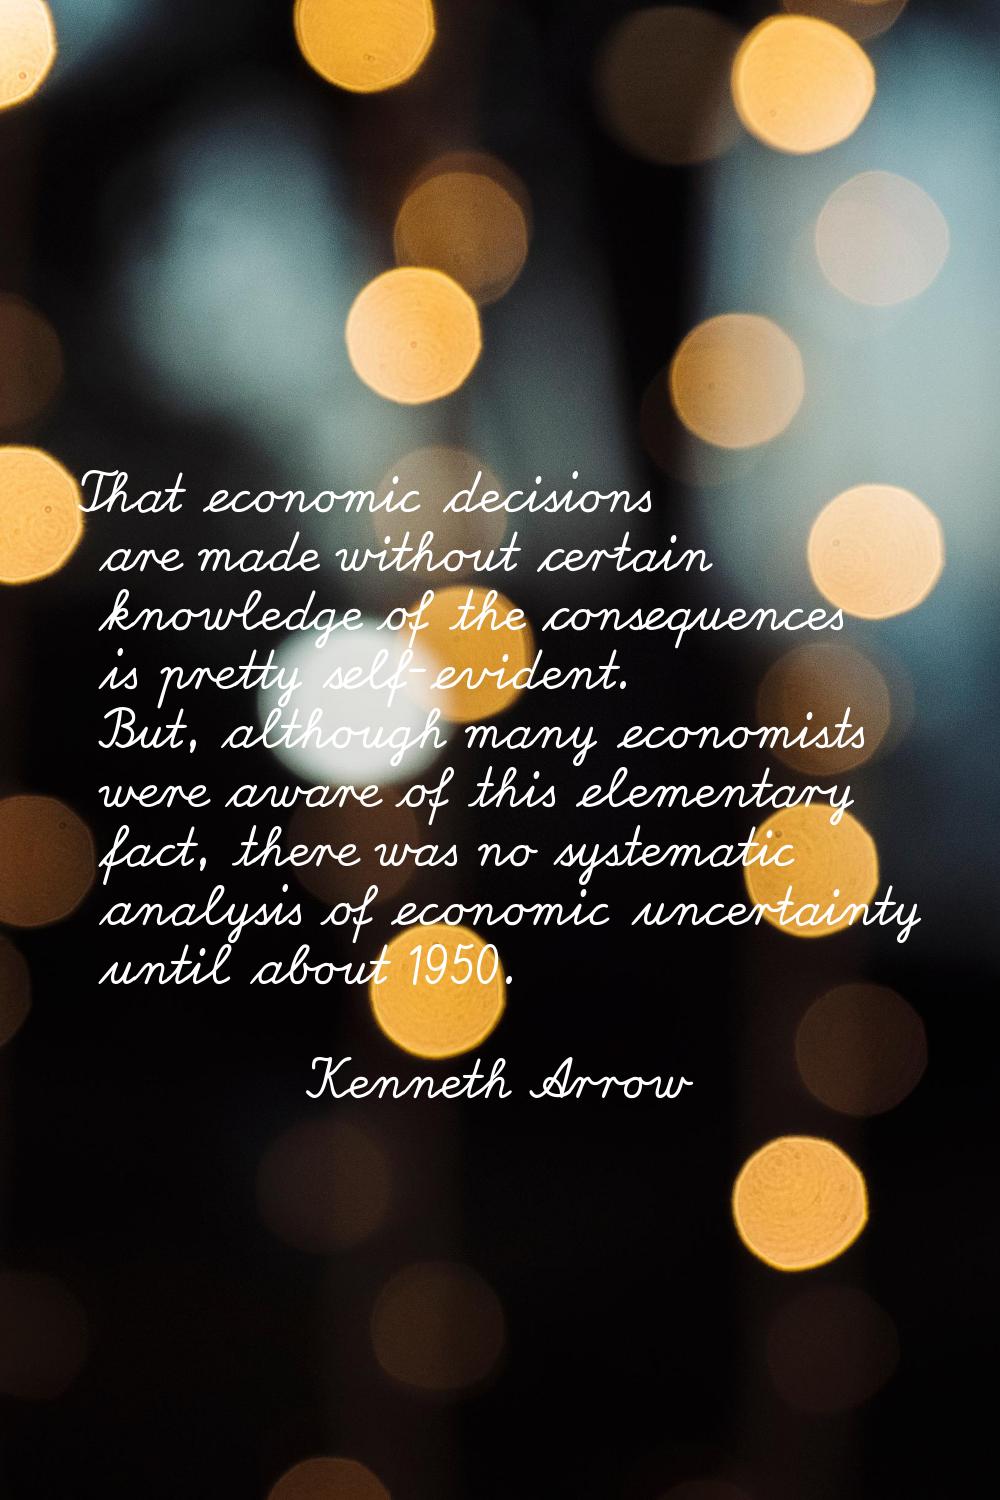 That economic decisions are made without certain knowledge of the consequences is pretty self-evide